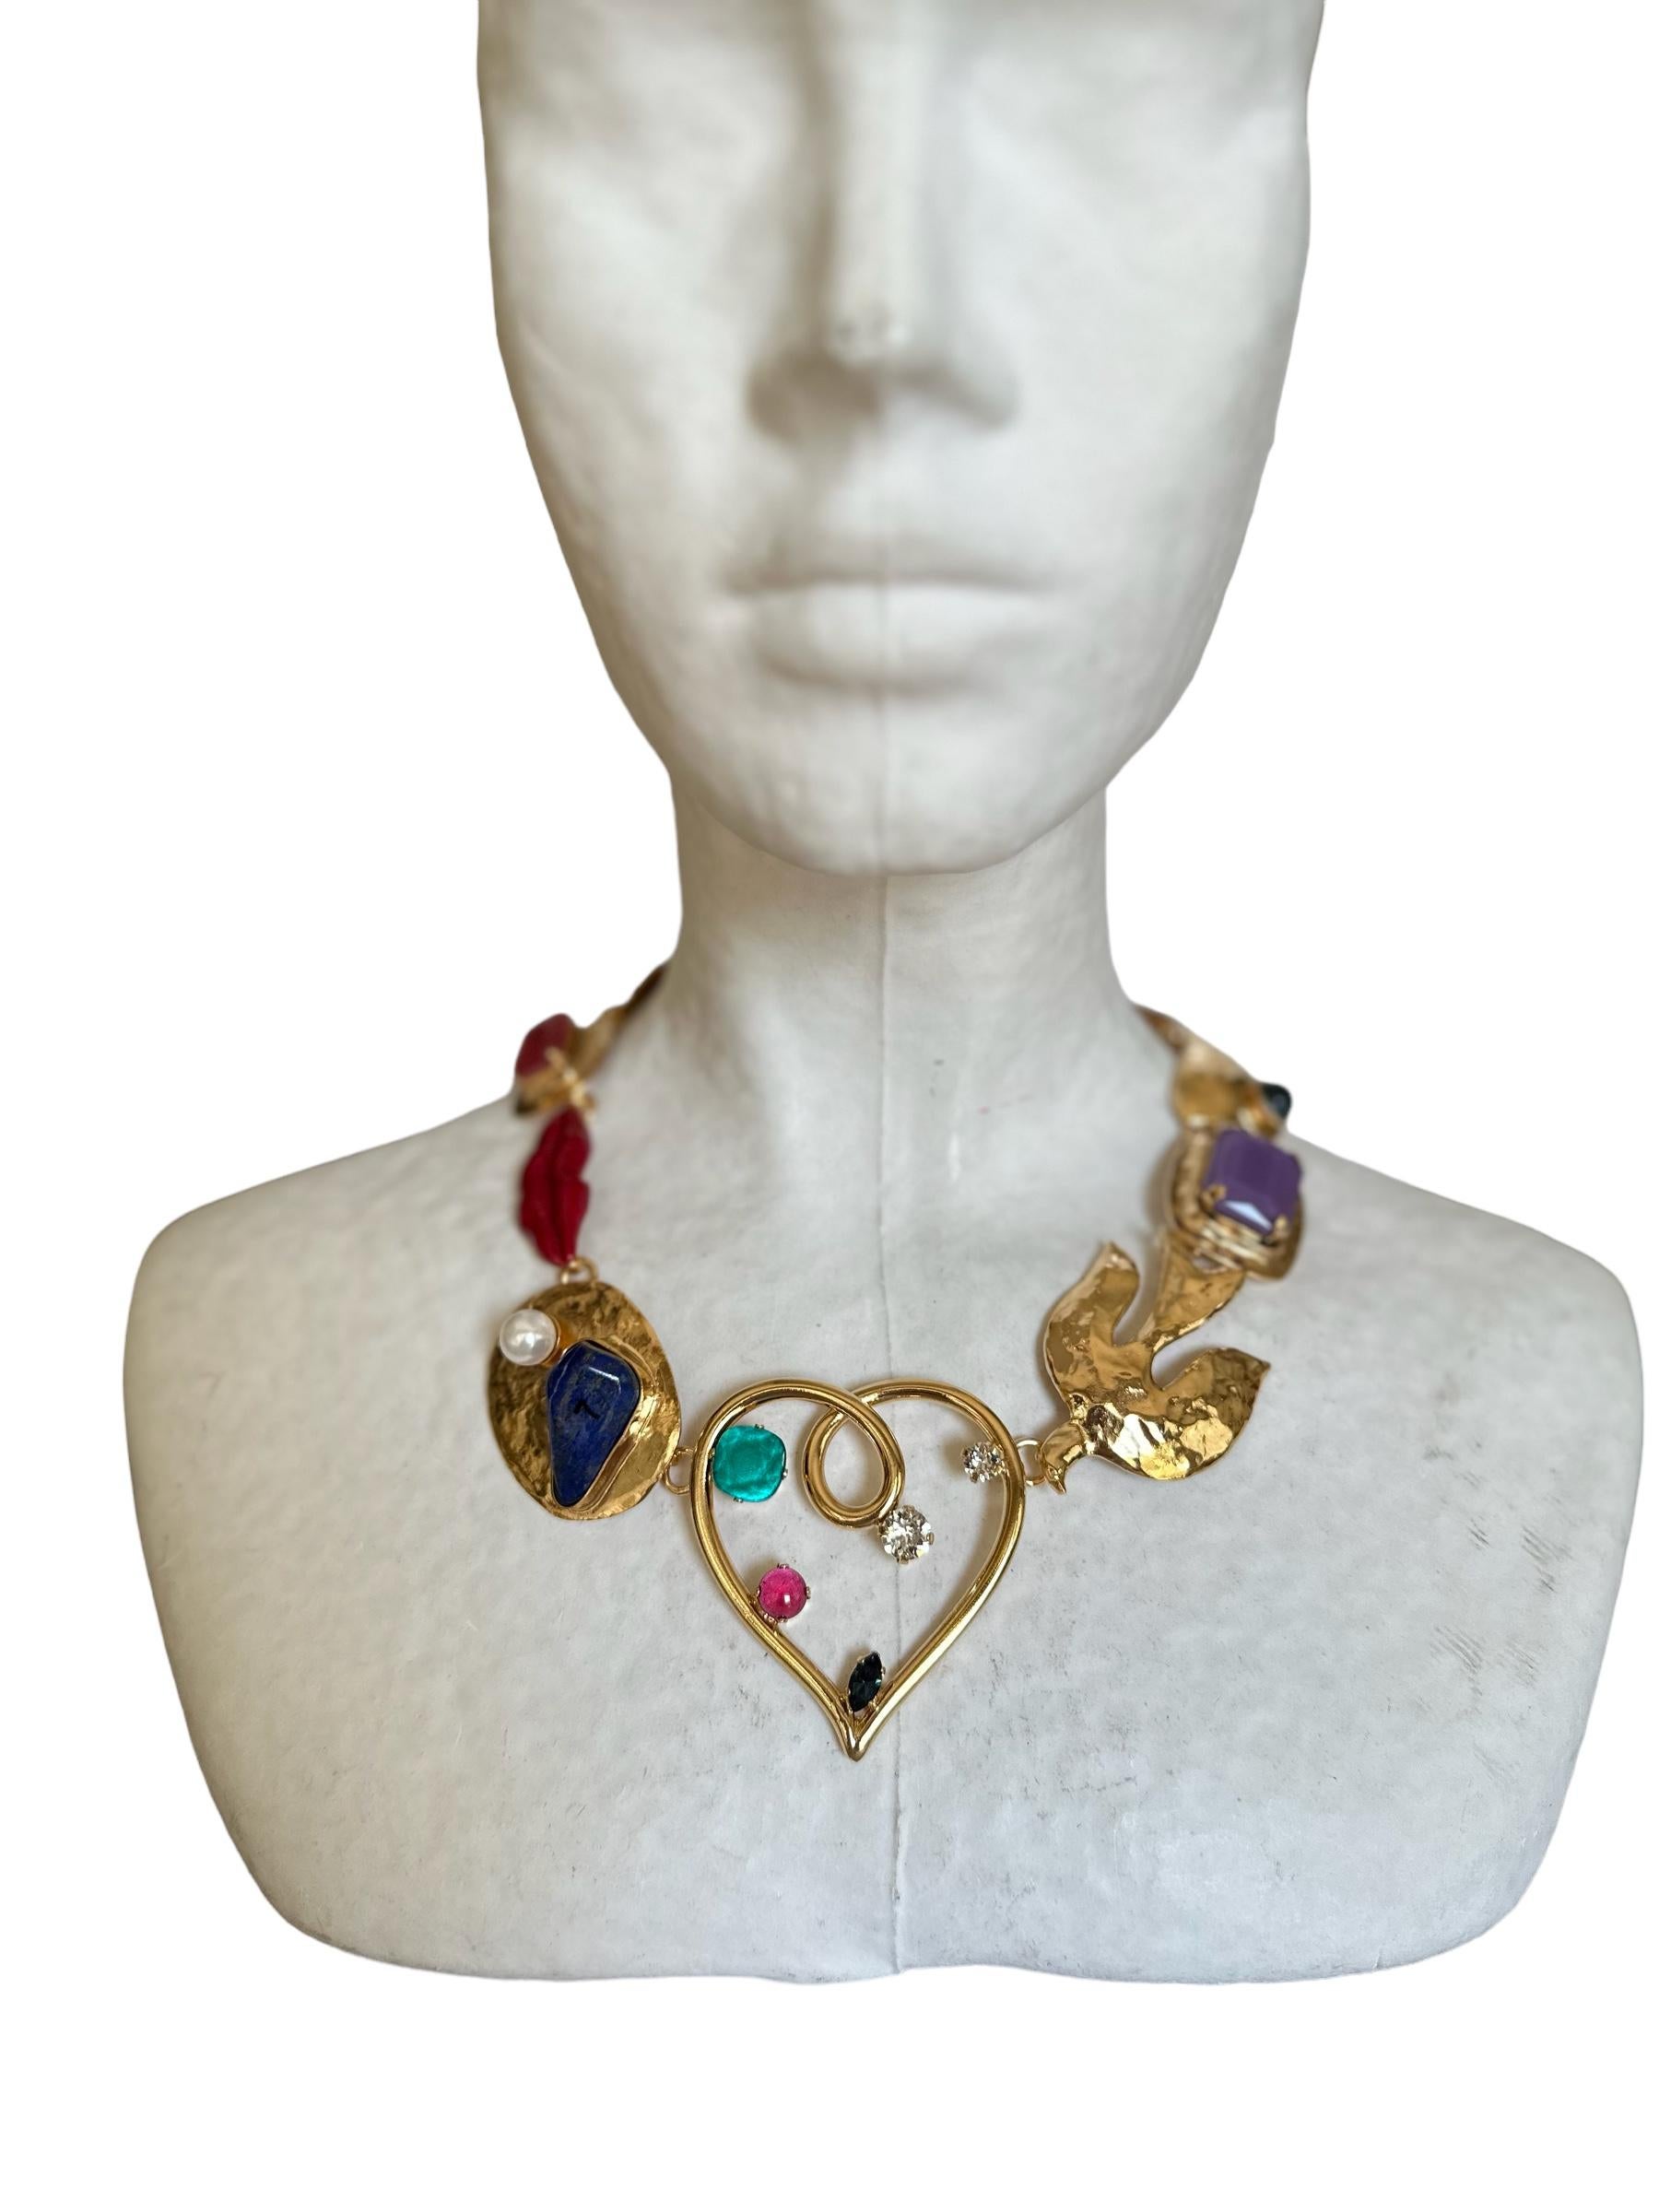 Dali collection:
A nod to the master of surrealism and his elegant mustaches. Melting shapes, birds in flight and lacquered mouths express the passion and creative madness of the artist.
Chocker necklace, with extension chain makes it easy to fit